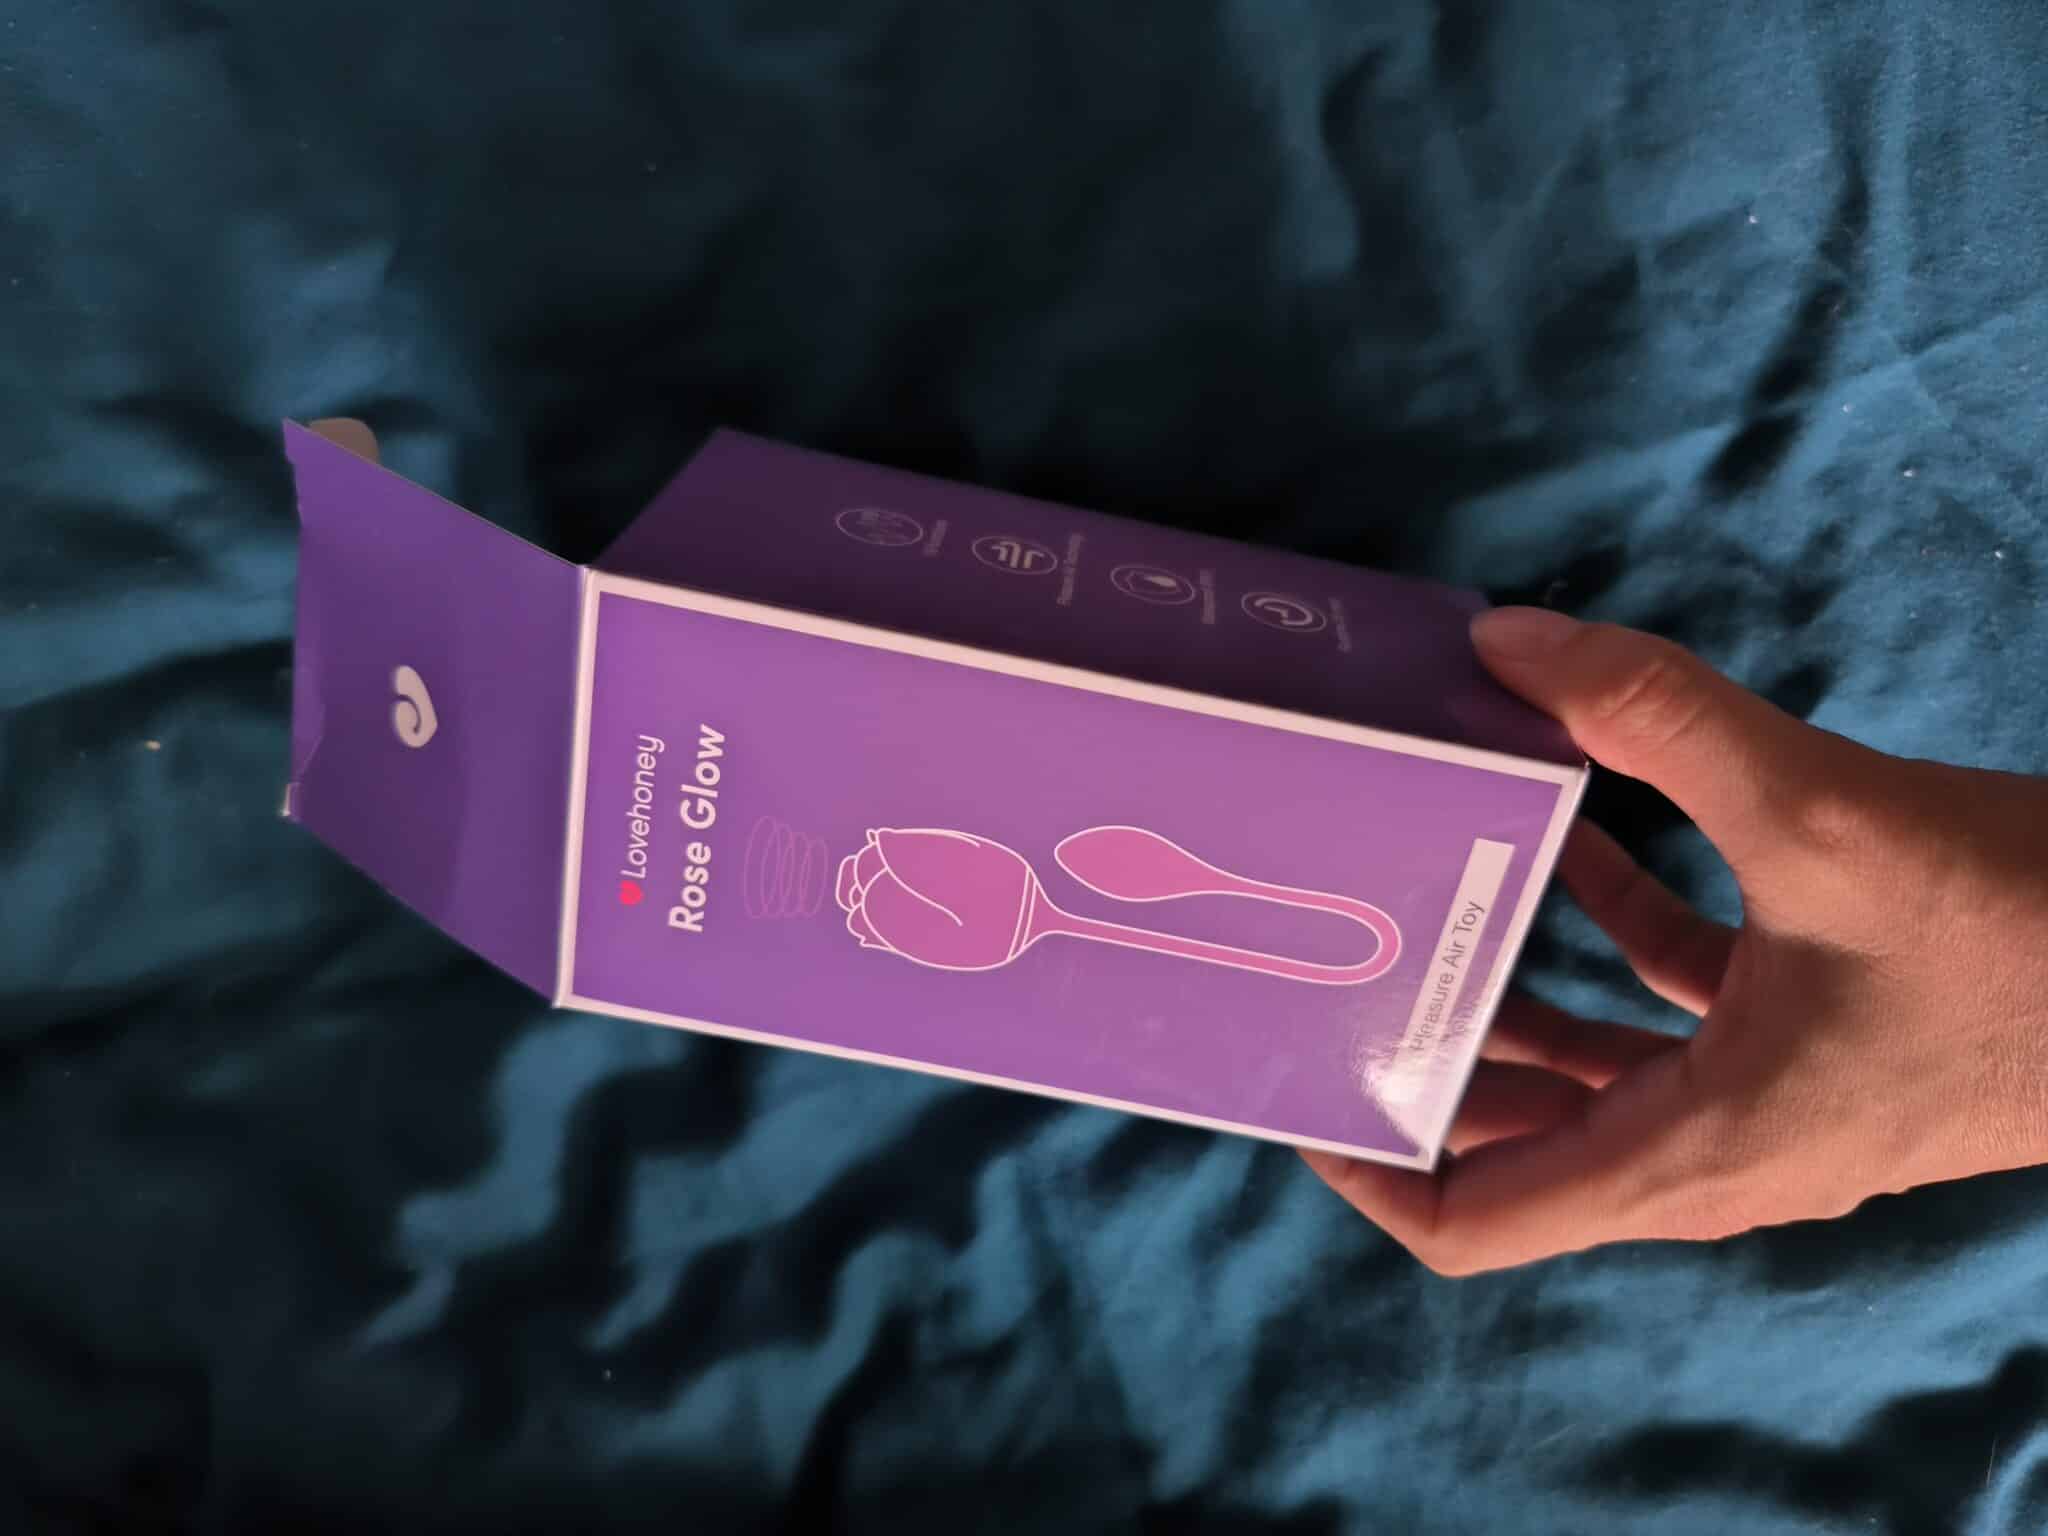 Lovehoney Rose Glow 2-in-1 Clitoral Suction Stimulator with Egg Vibrator The Lovehoney Rose Glow 2-in-1 Clitoral Suction Stimulator with Egg Vibrator’s Packaging